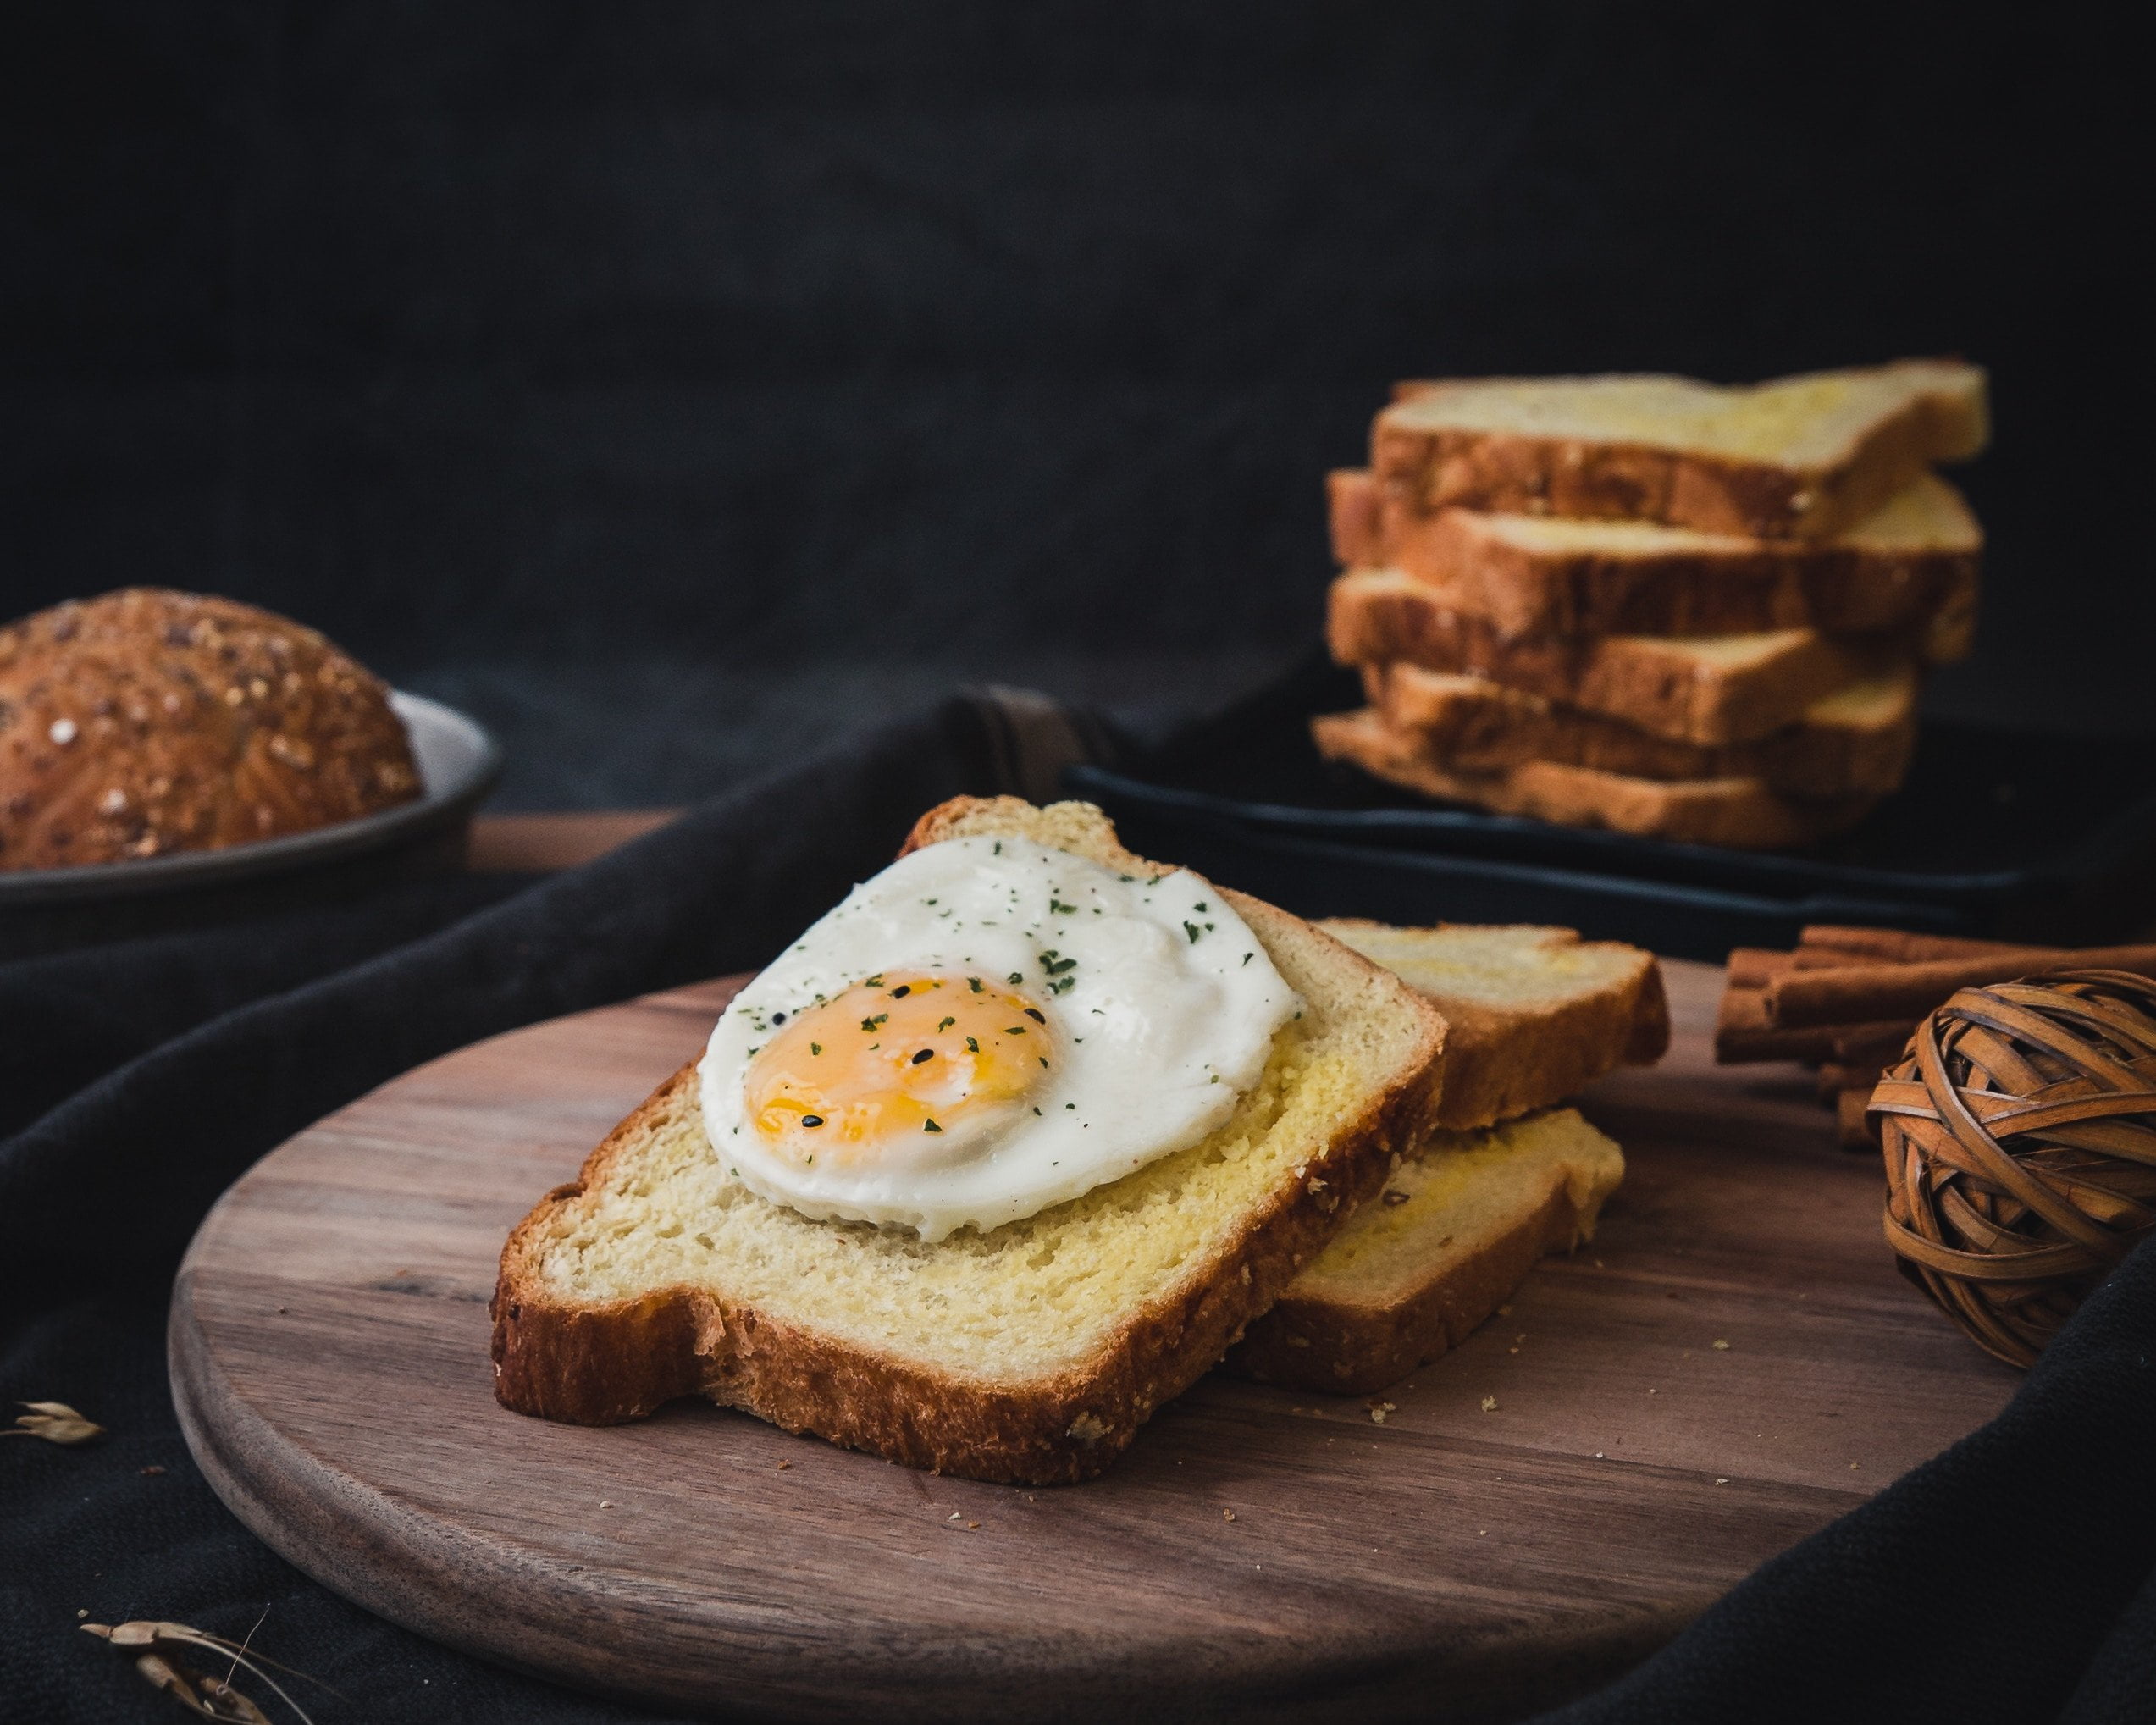 https://buro247.rs/wp-content/uploads/2019/05/foodiesfeed.com_white-toast-with-fried-eggs.jpg